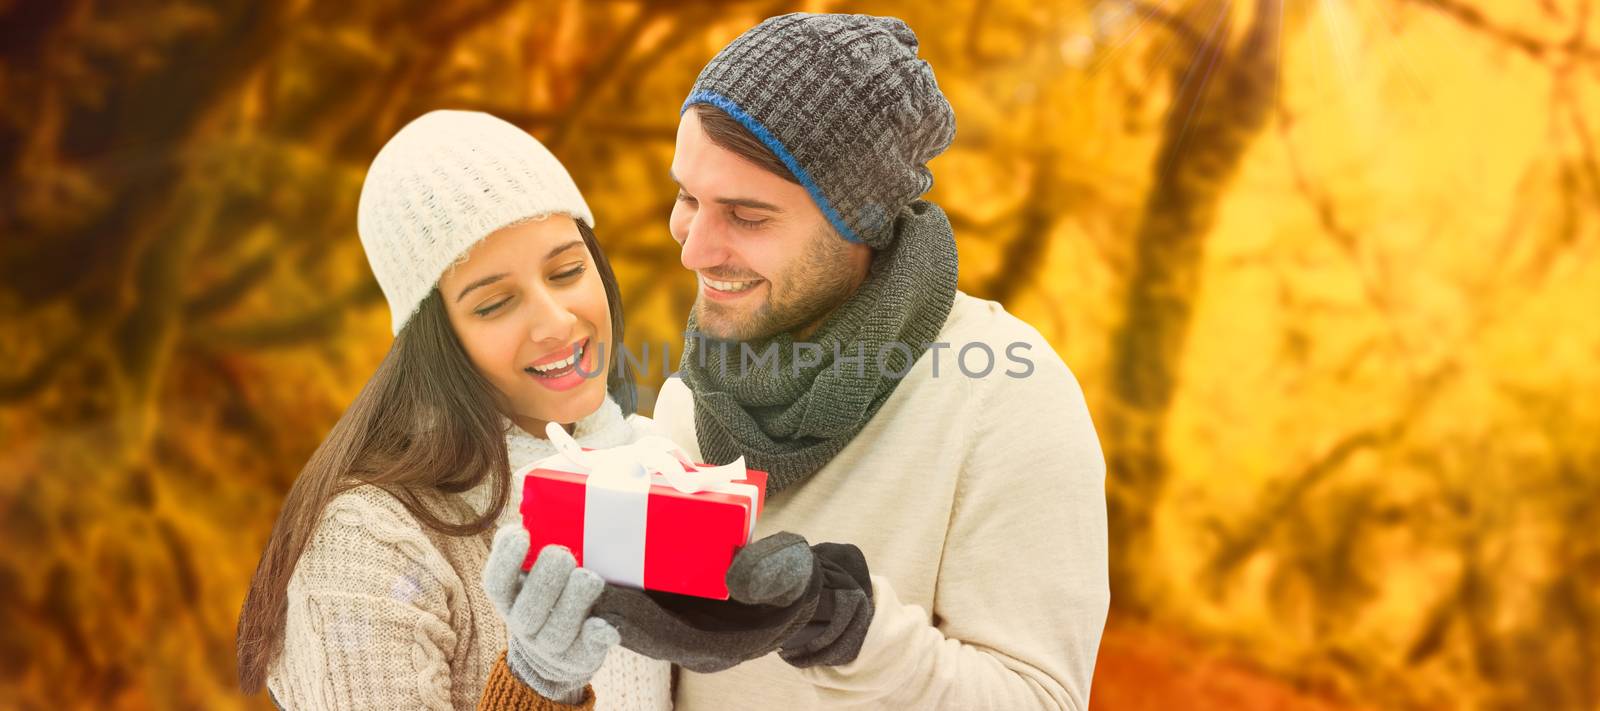 Winter couple holding gift against peaceful autumn scene in forest